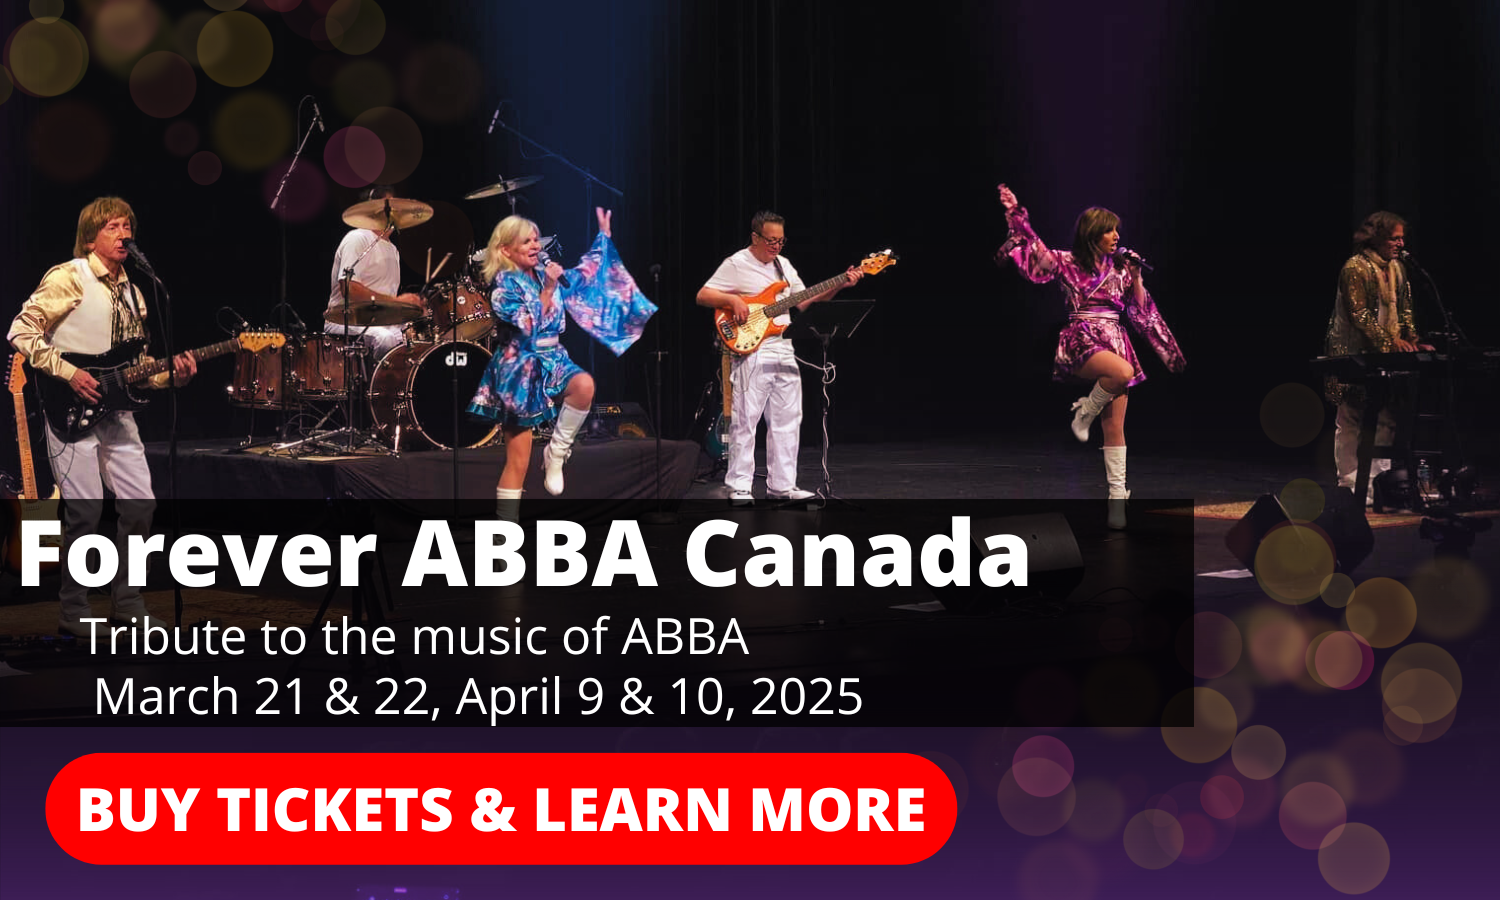 Forever ABBA Canada: Tribute to ABBA